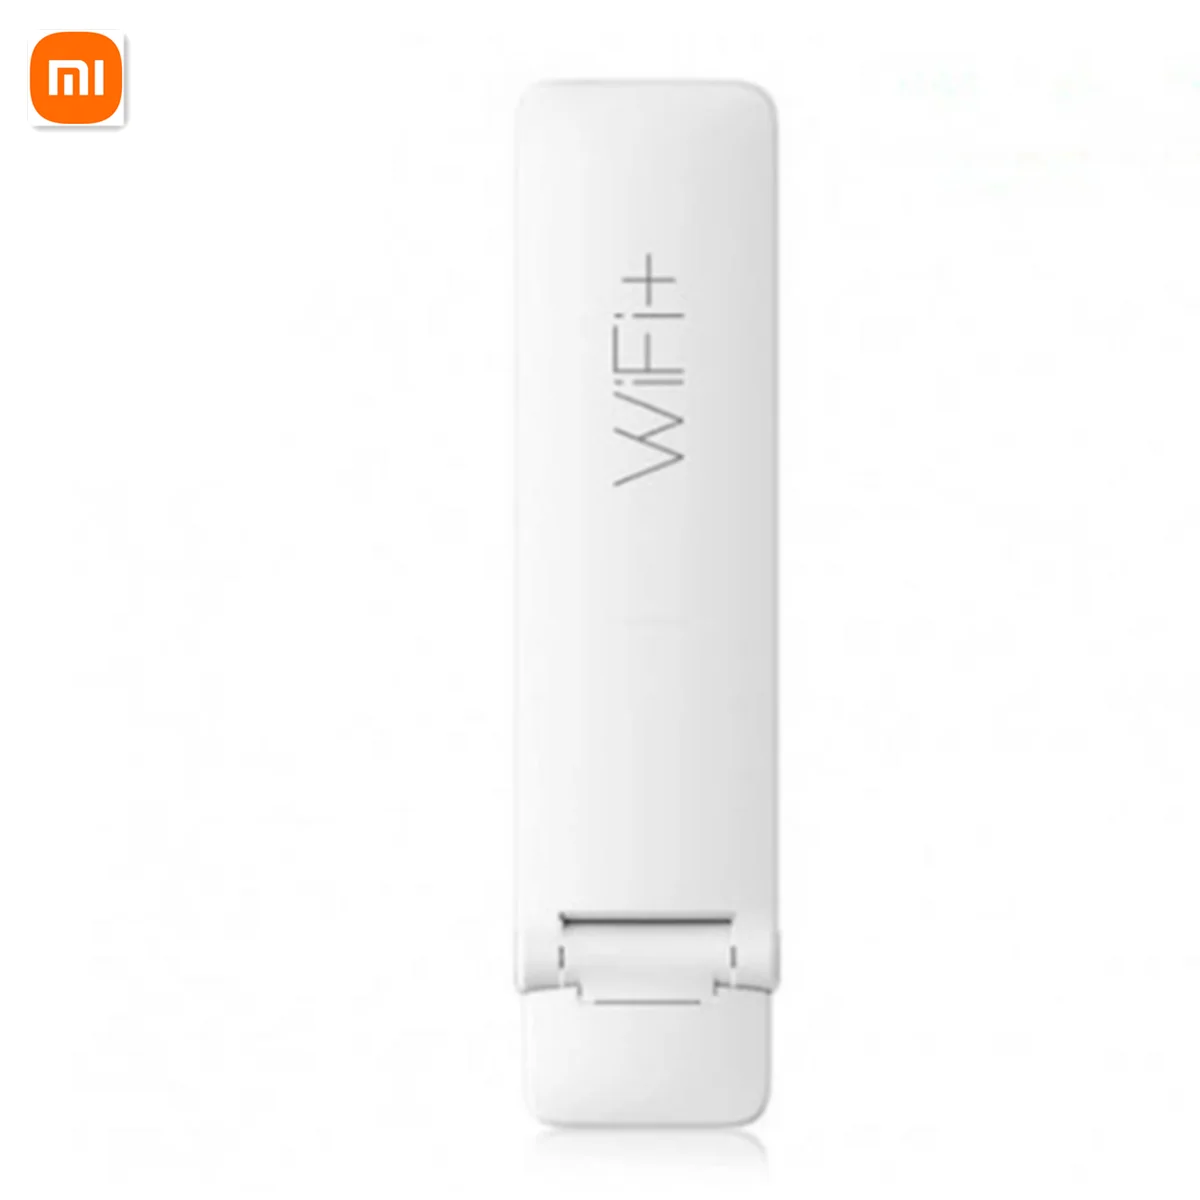 70% New Xiaomi Wifi Repeater 2 Amplifier Extender 300mbps Wireless Wifi  Router Extender For Smart Mi Home Router Without Box - Smart Remote Control  - AliExpress